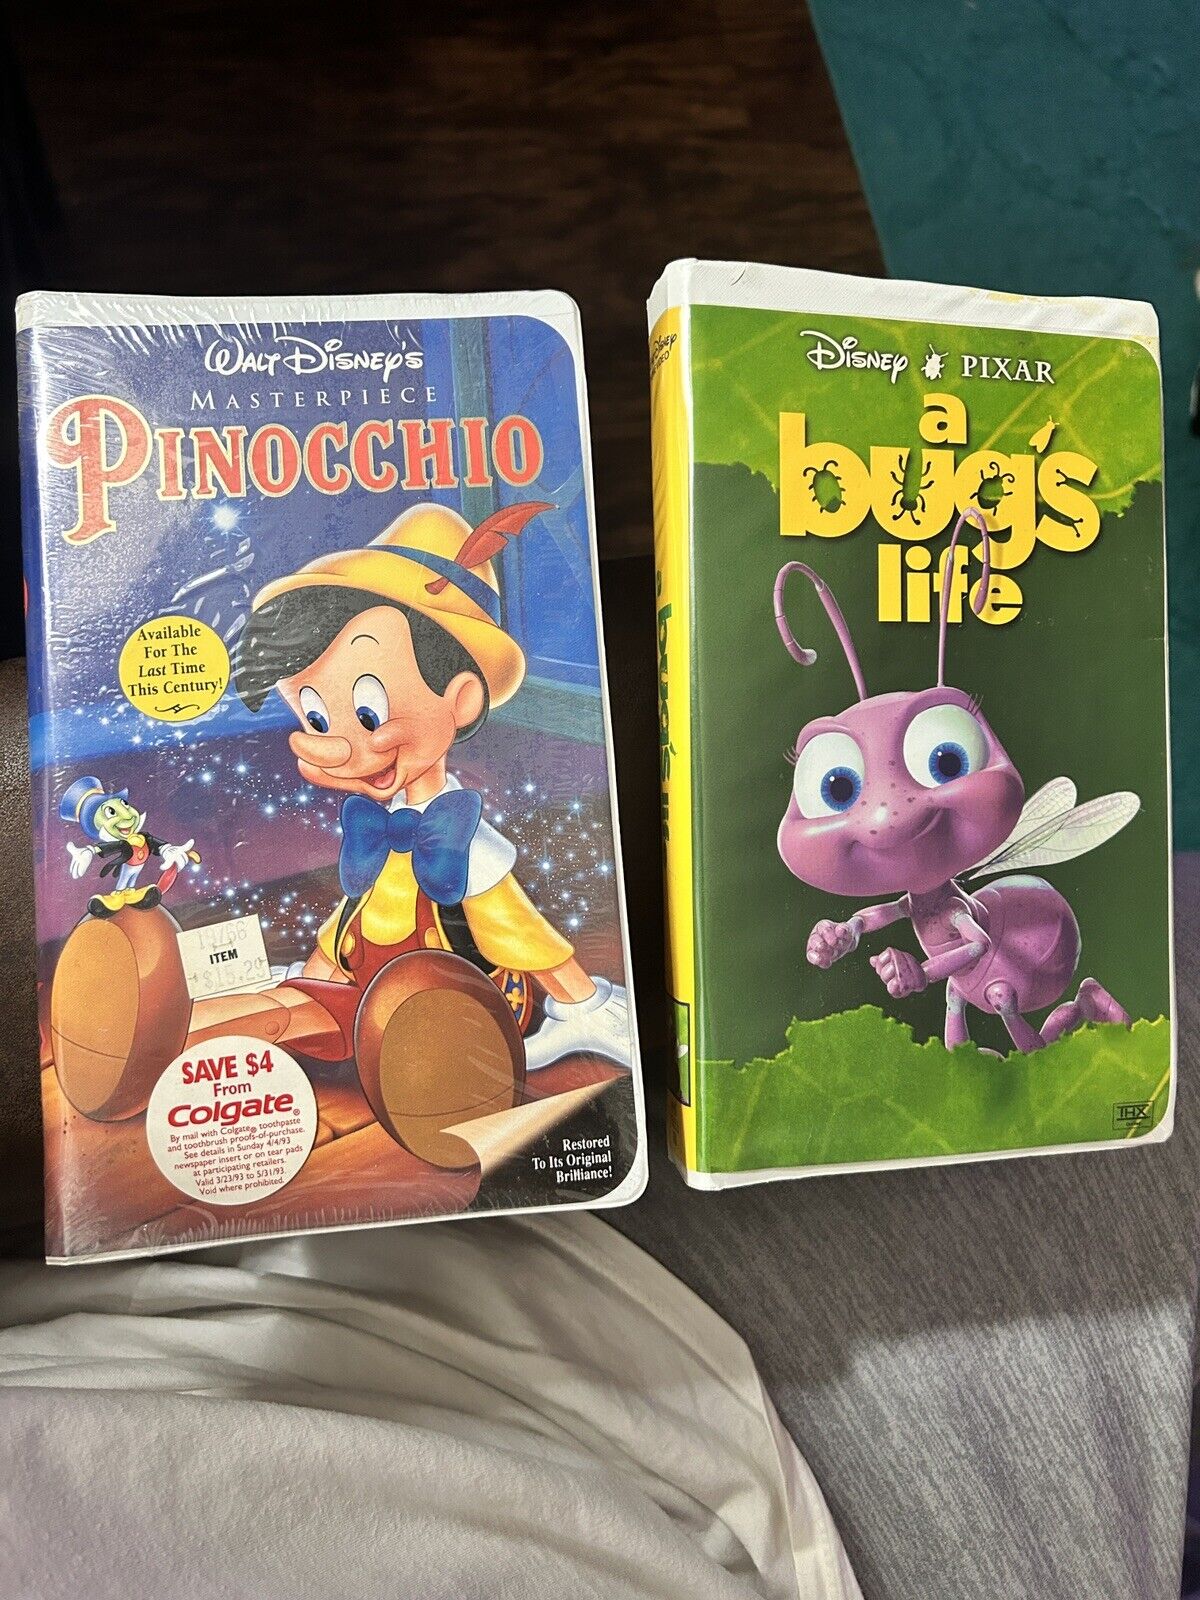 Walt Disney Pinocchio VHS Tape and A Bugs Life VHS Tape (Disney VHS Tapes)